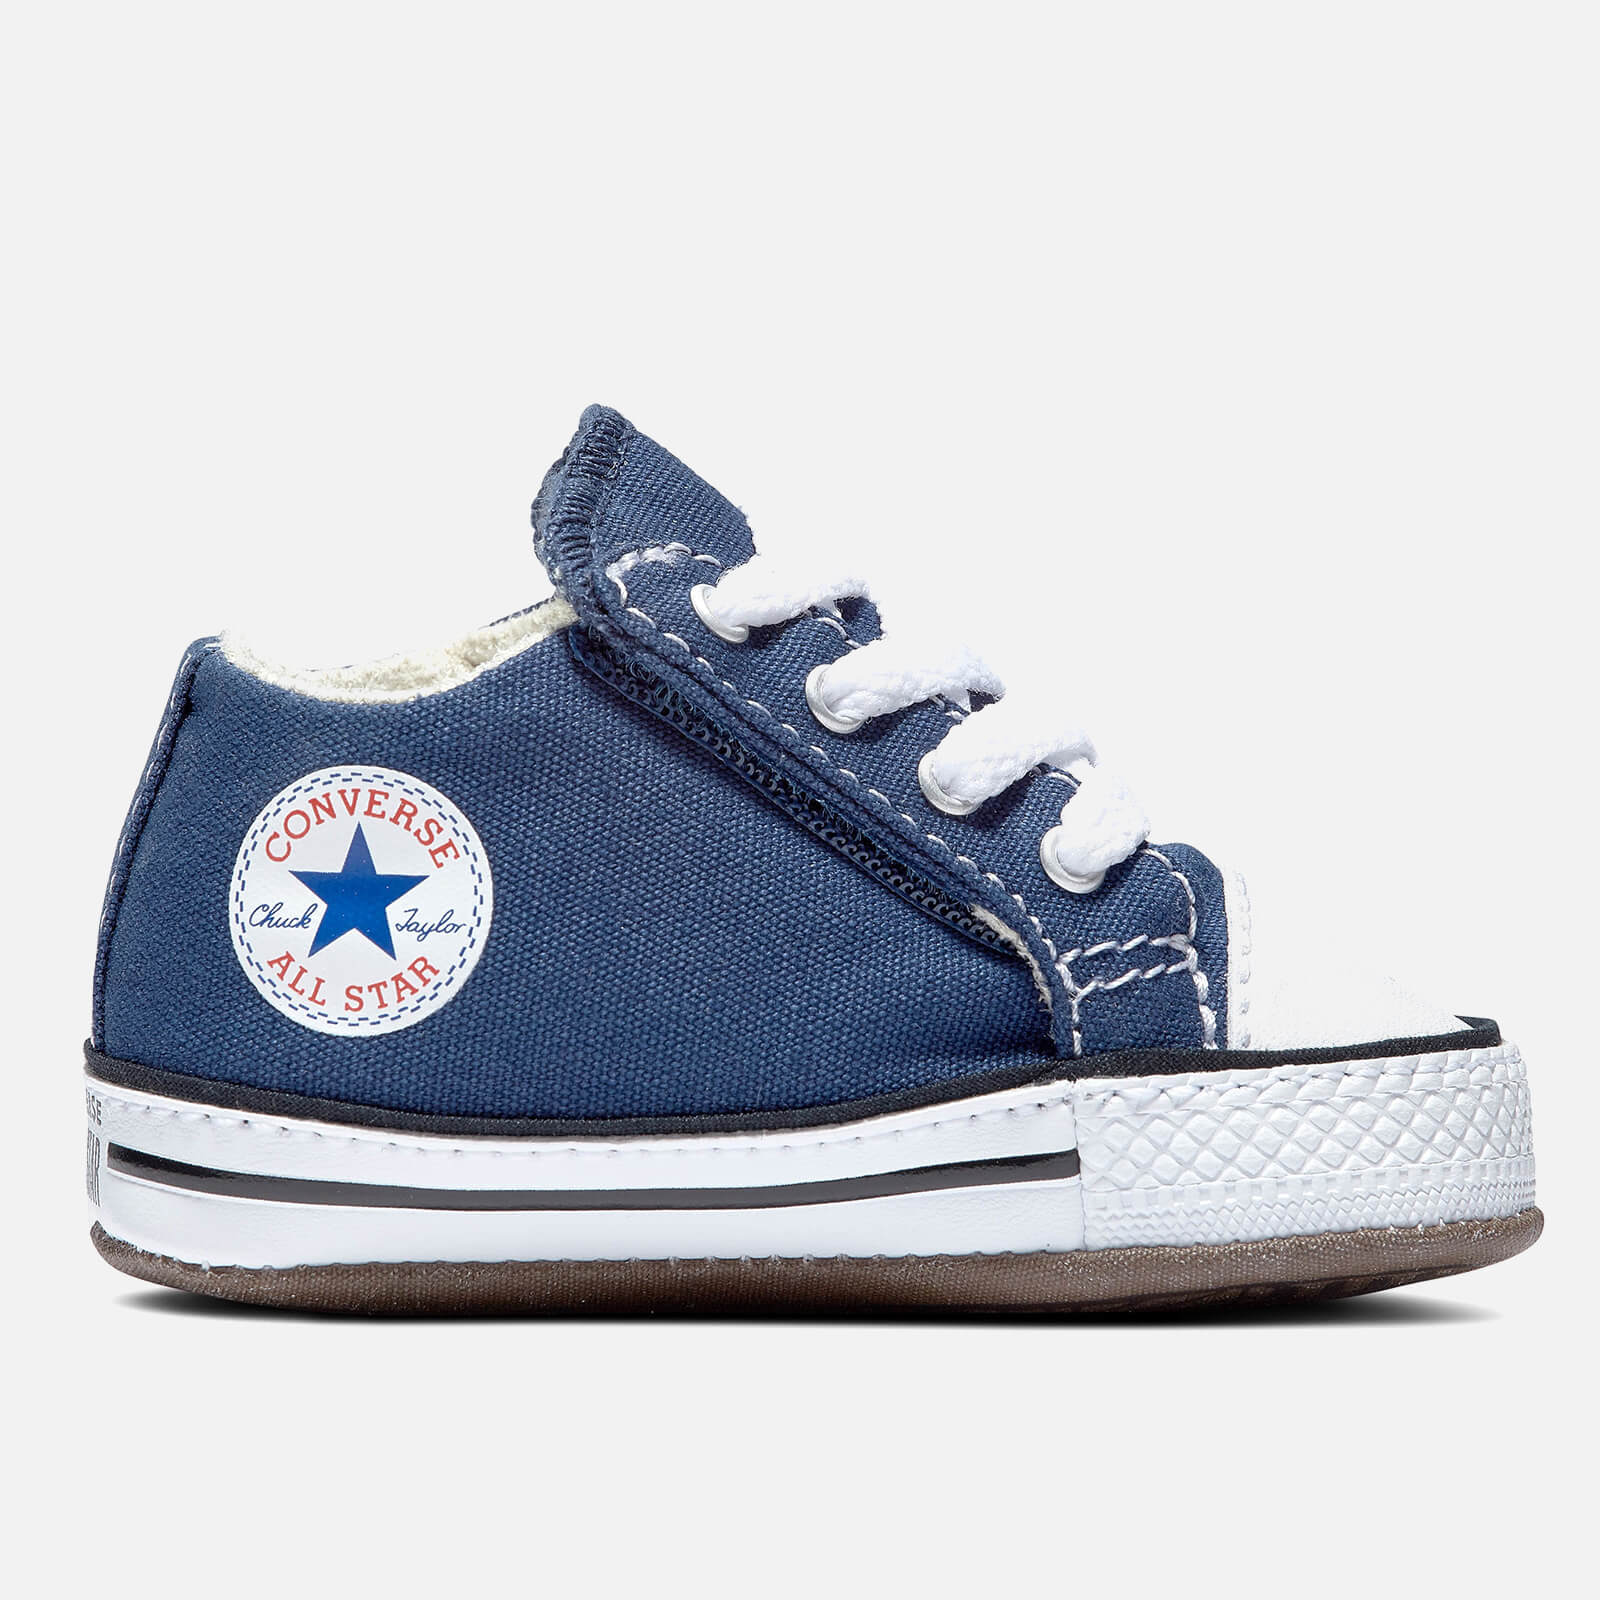 Image of Converse Babys' Chuck Taylor All Star Cribster Soft Trainers - Navy - UK 4 Baby